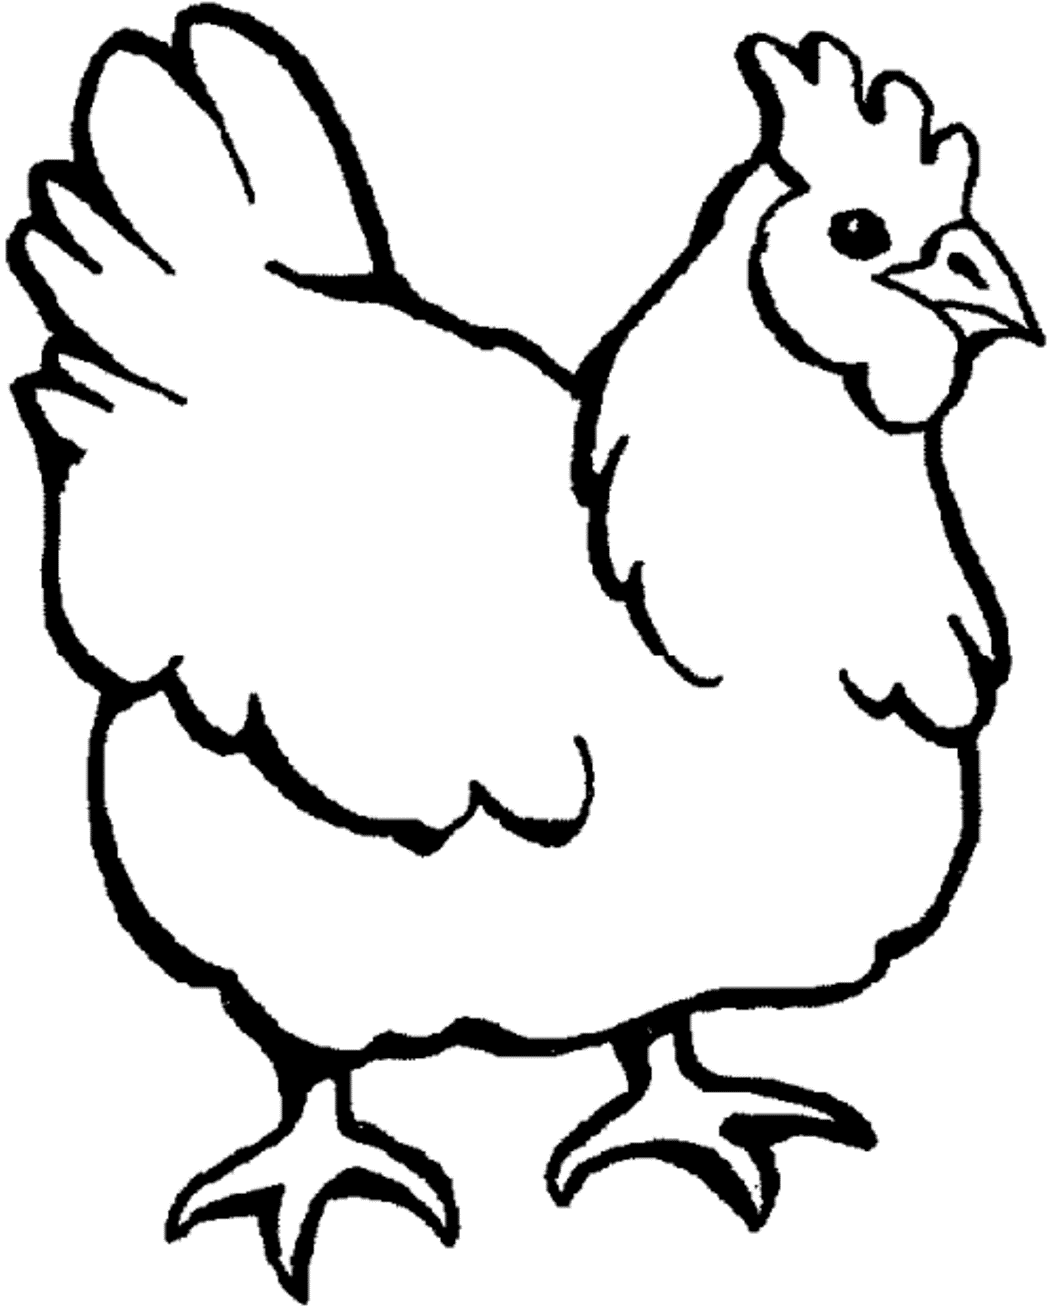 Hen Black And White Drawing - ClipArt Best